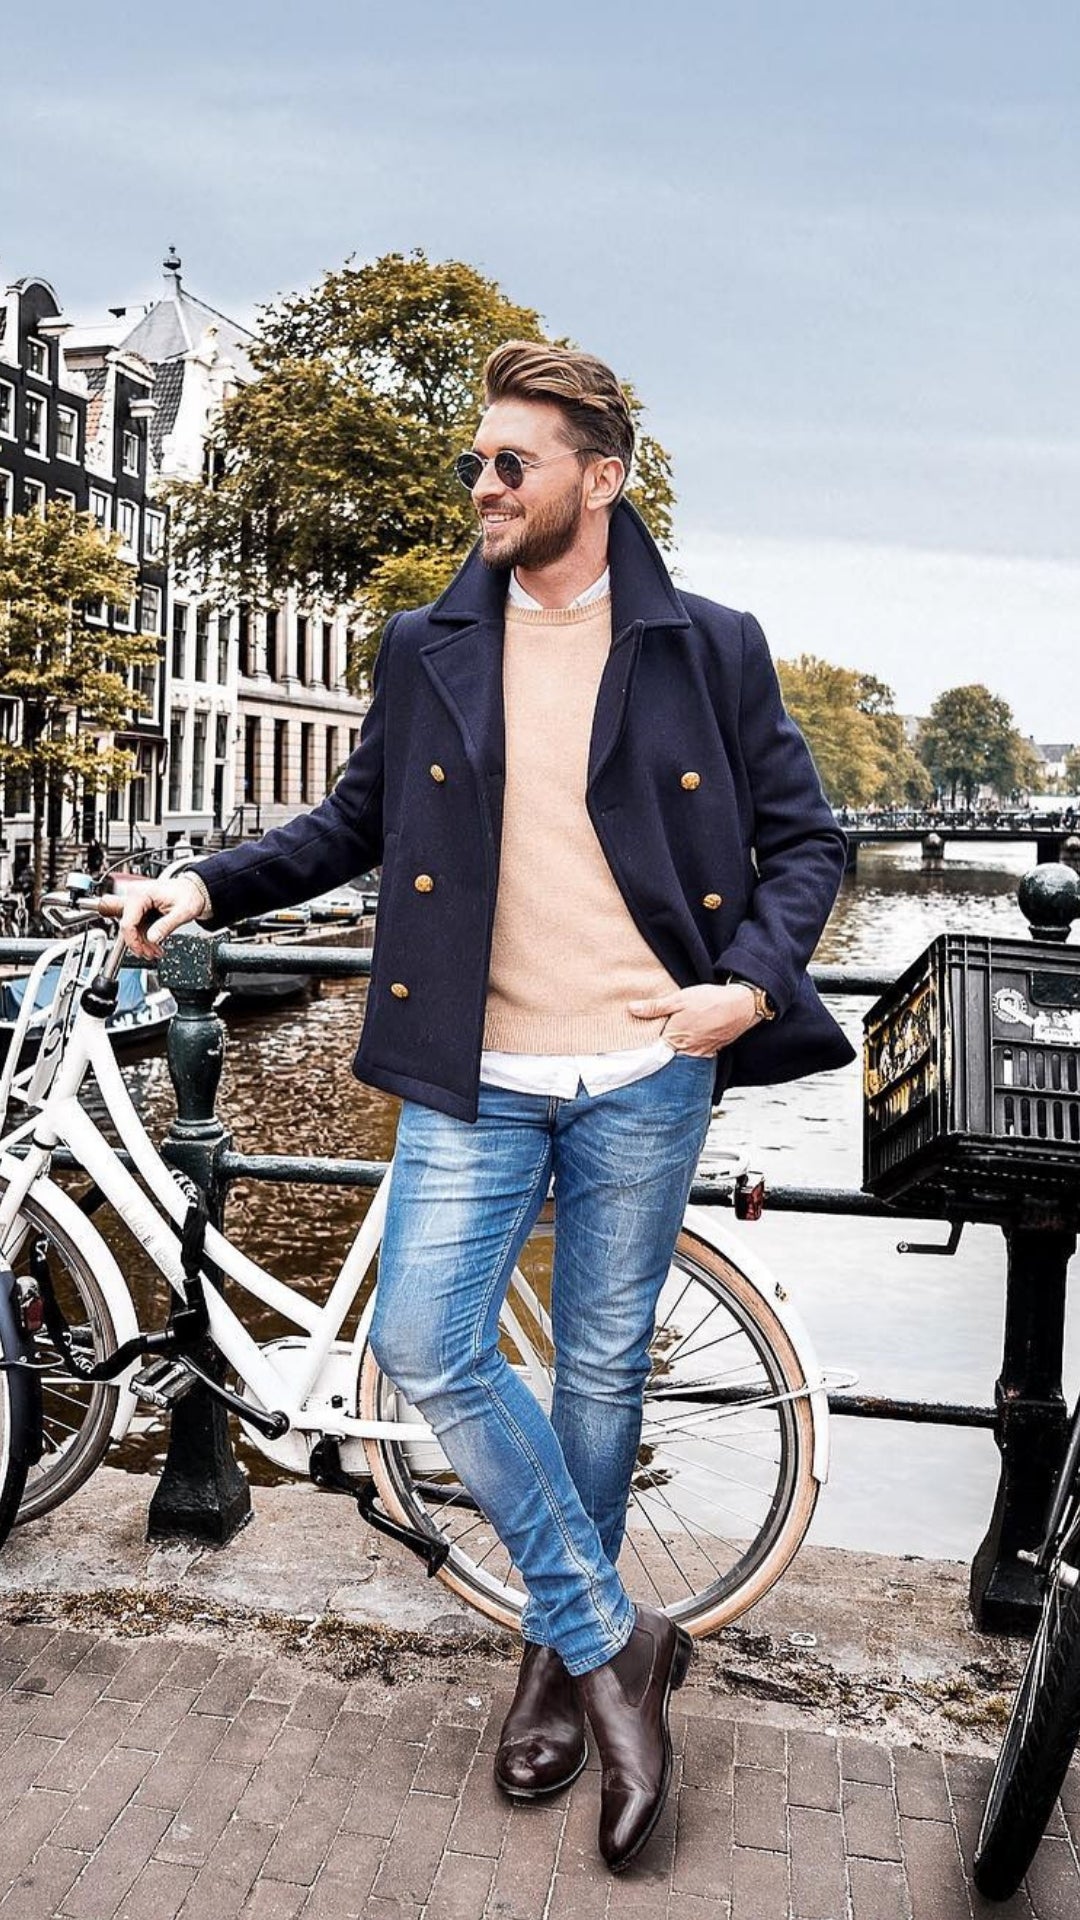 Looking for cool fall street style ideas? These 5 amazing fall street style looks will make you look sharp. #fallstyle #fallfashion #mens #fashion #street #style #fashiontips